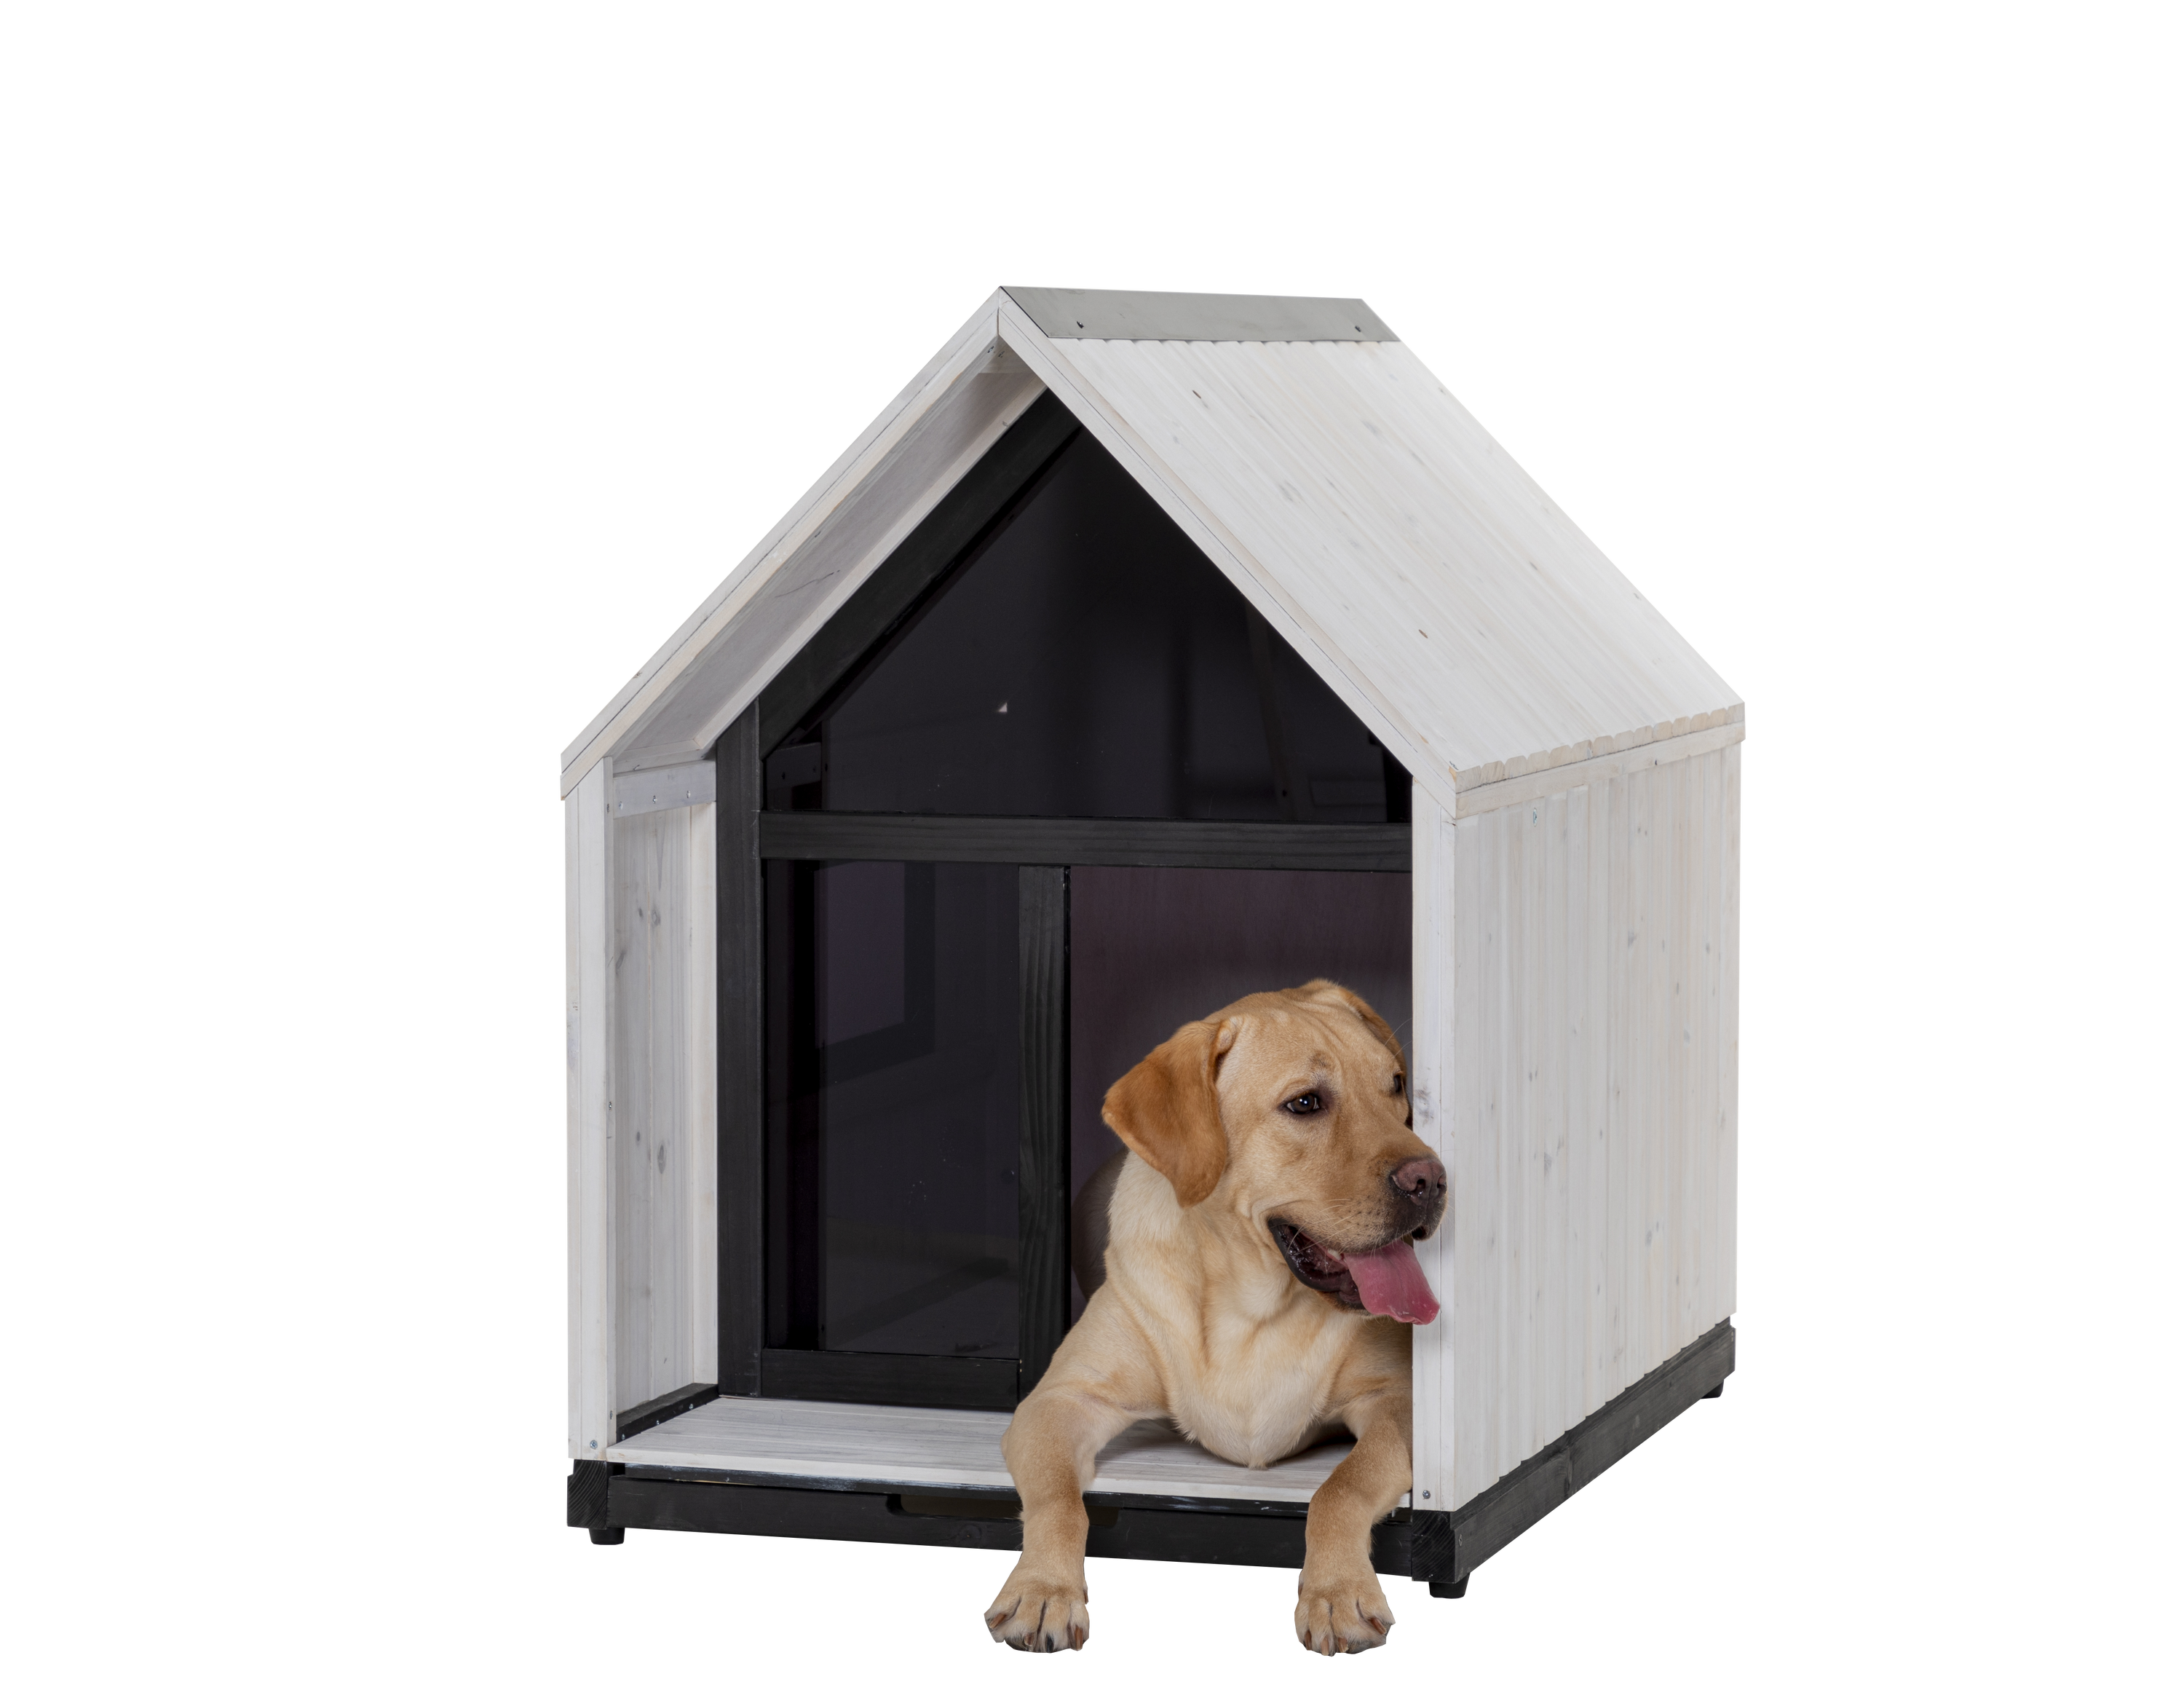 Outdoor Dog House Sun Protection for Small Medium Large Sized Dogs, Weatherproof with Slide Out Floor for Easy Cleaning